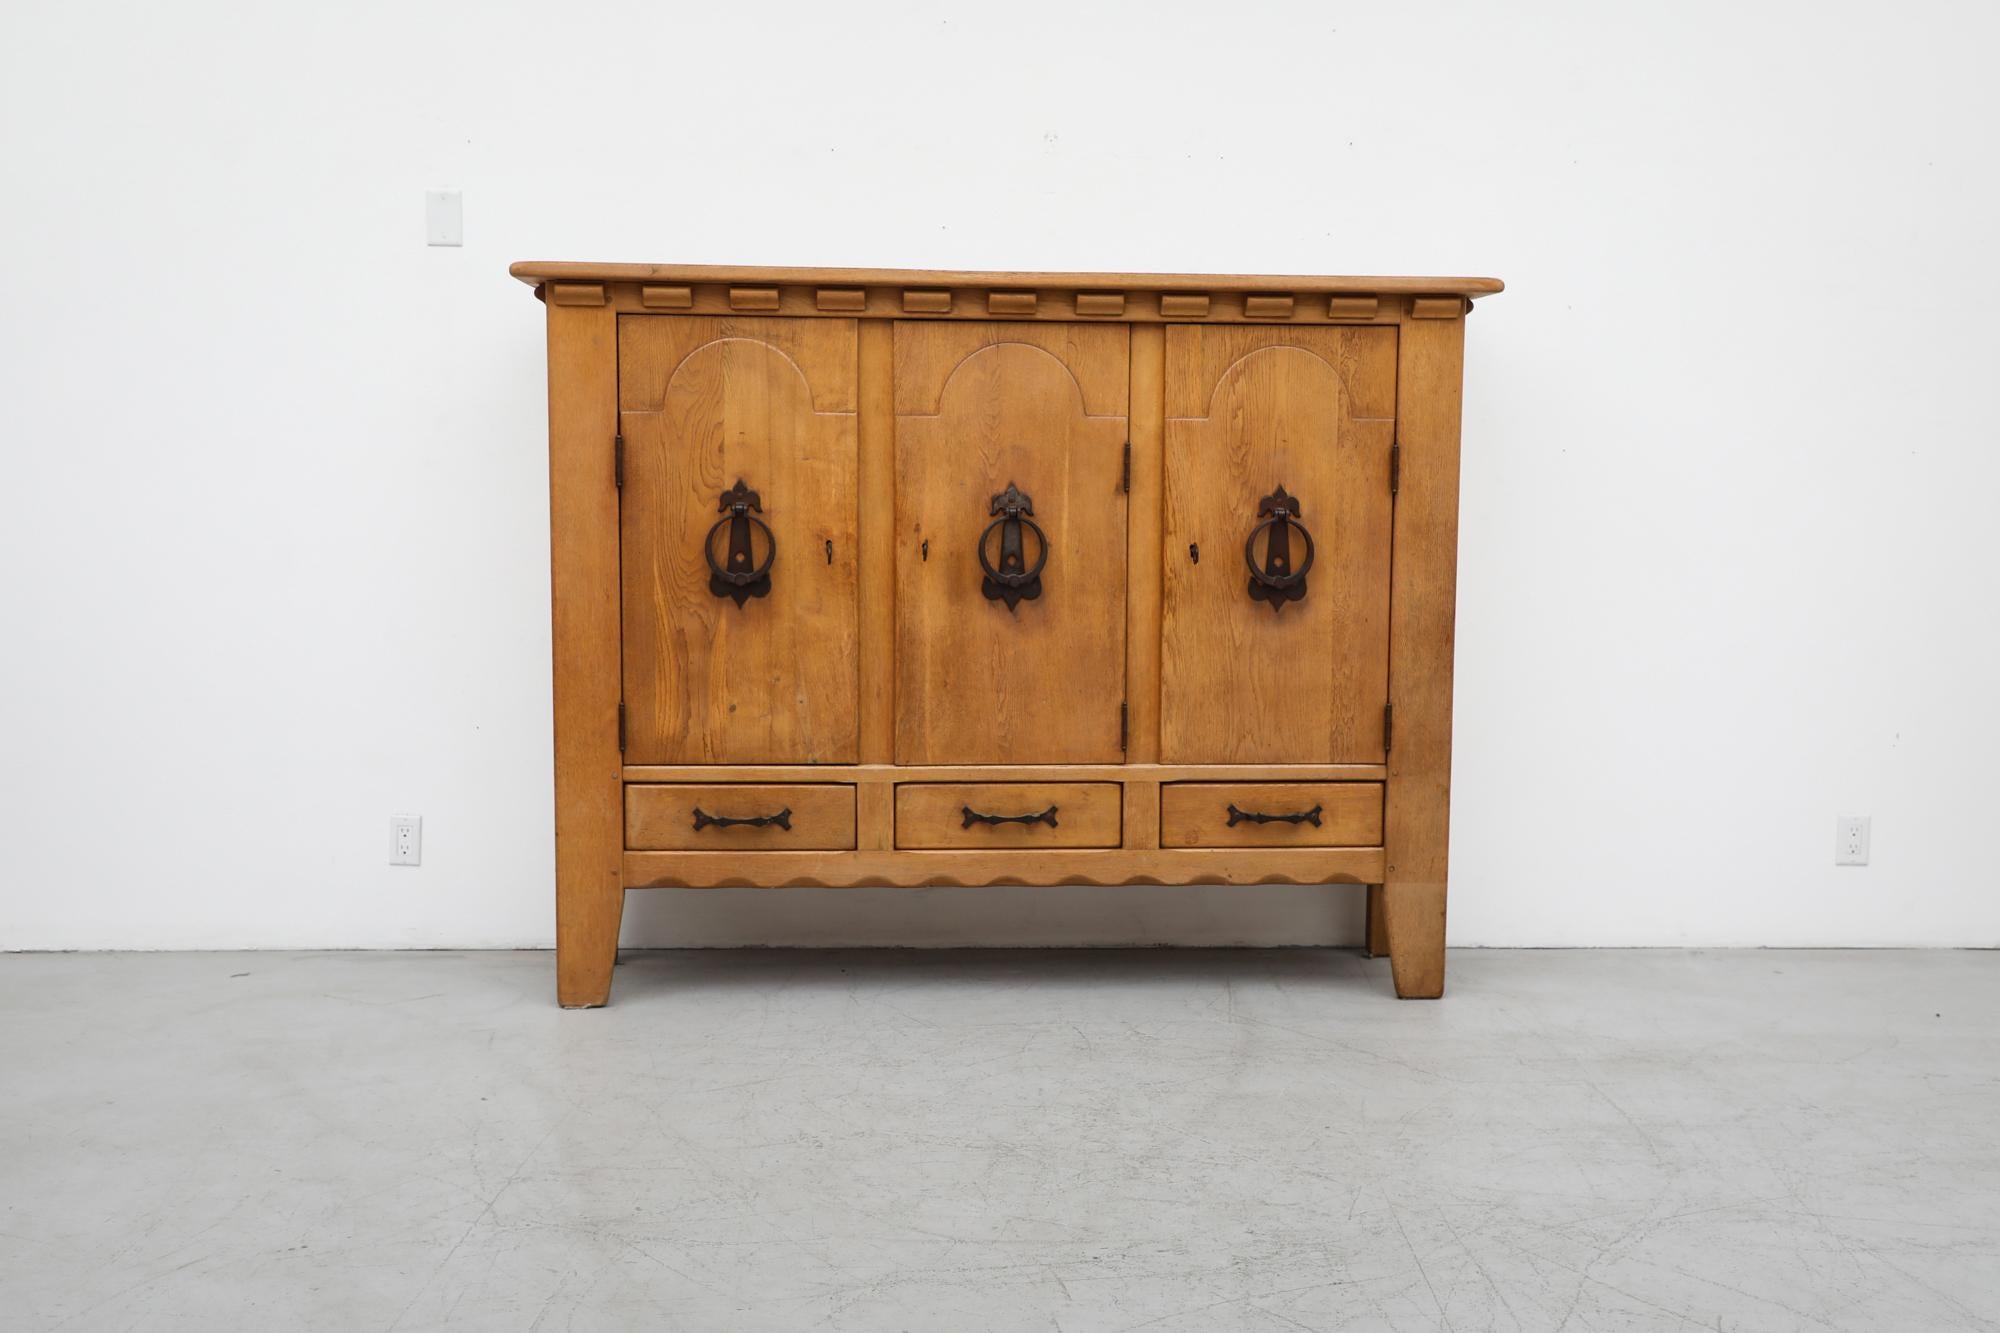 Mid-Century Guillerme et Chambron Inspired large brutalist solid oak sideboard with iron hardware by Sprij Meubelen. This high sideboard has shelving inside the cabinets and three lower drawers. Cabinet doors lock with large iron keys. In original